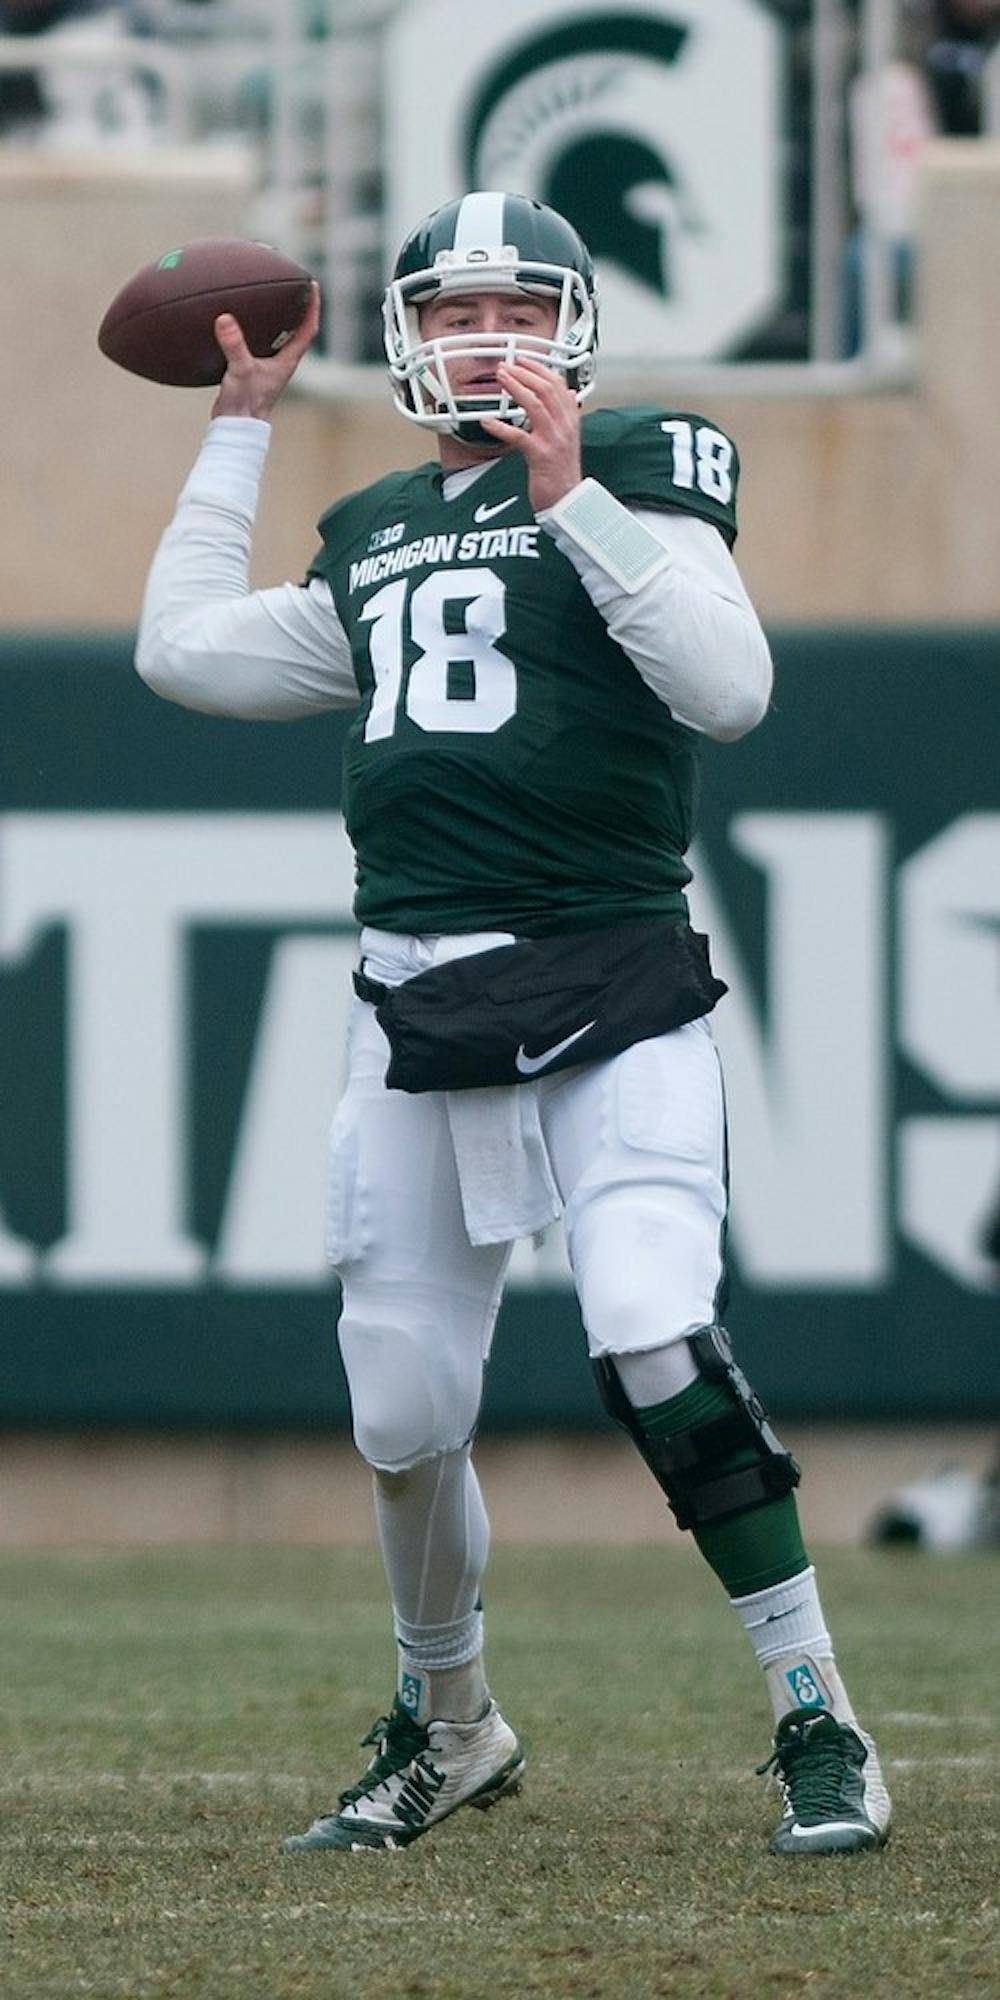 <p>Junior quarterback Connor Cook throws a pass Nov. 22, 2014, during the game against Rutgers at Spartan Stadium. Cook passed two touchdowns during the game. The Spartans defeated the Scarlet Knights, 45-3. Raymond Williams/The State News</p>